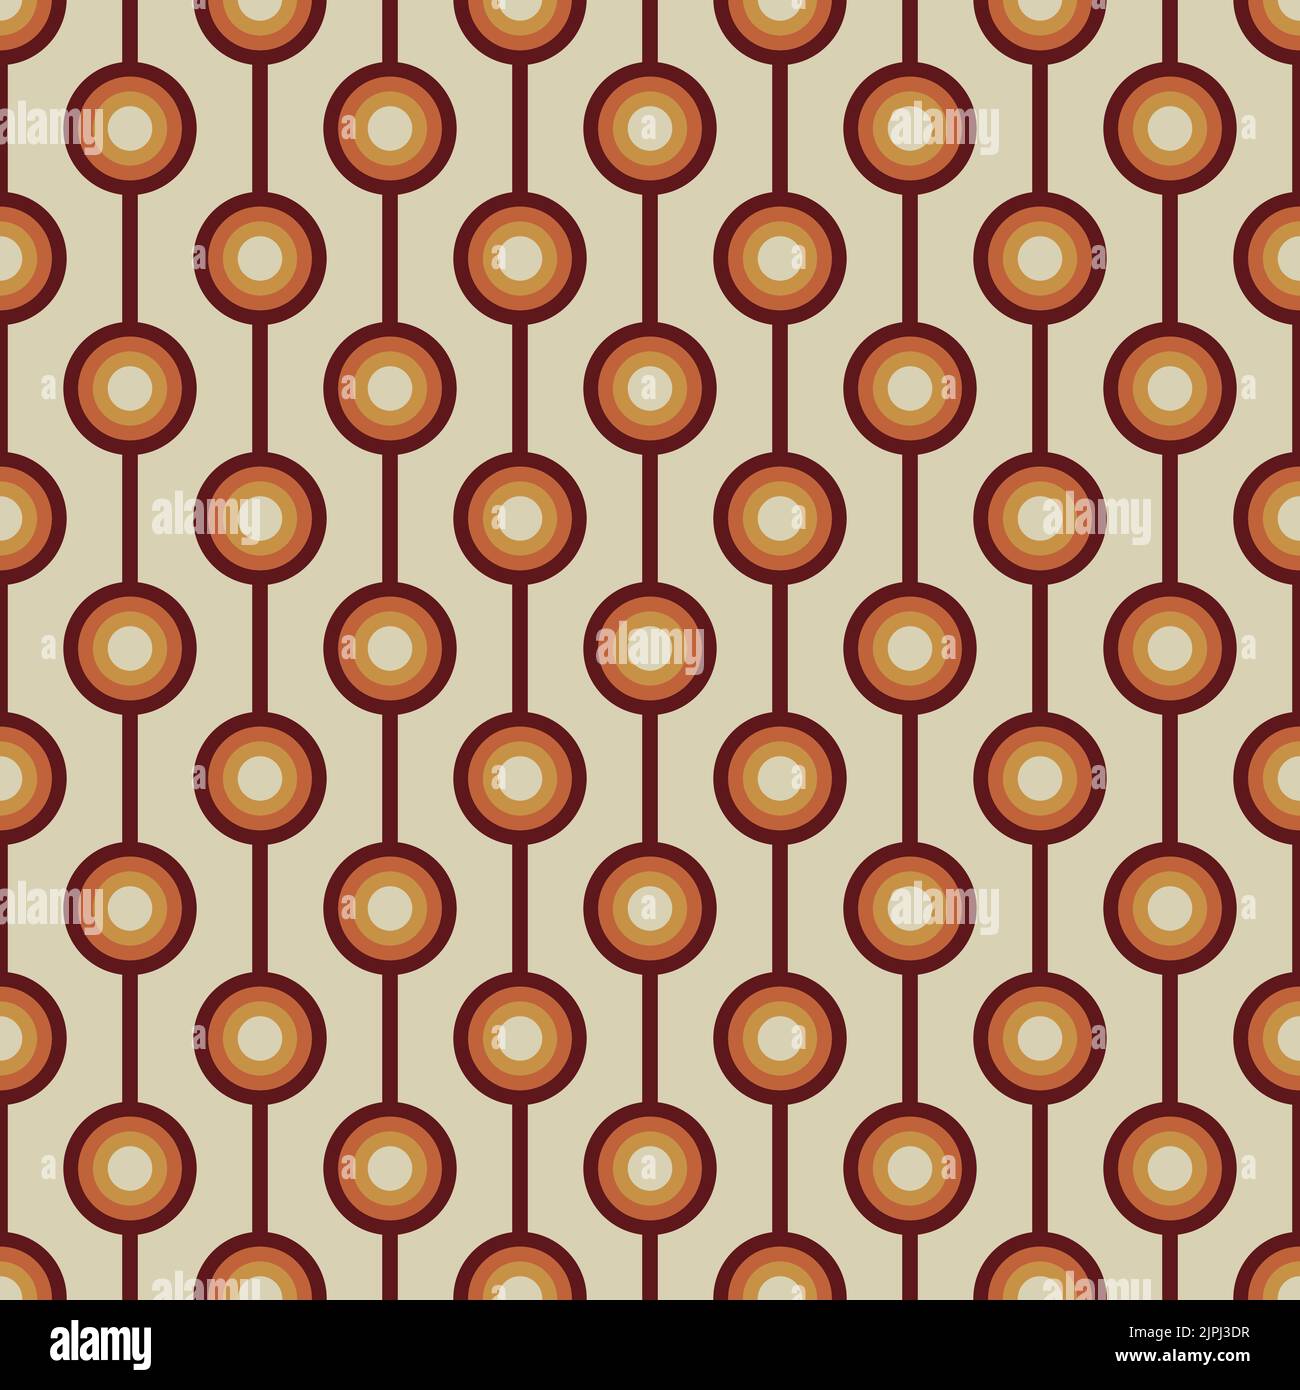 70 s seamless pattern. Retro geometric seamless background in seventies style. Groovy scrapbook paper. Yellow, orange, brown vintage colors vector pat Stock Vector